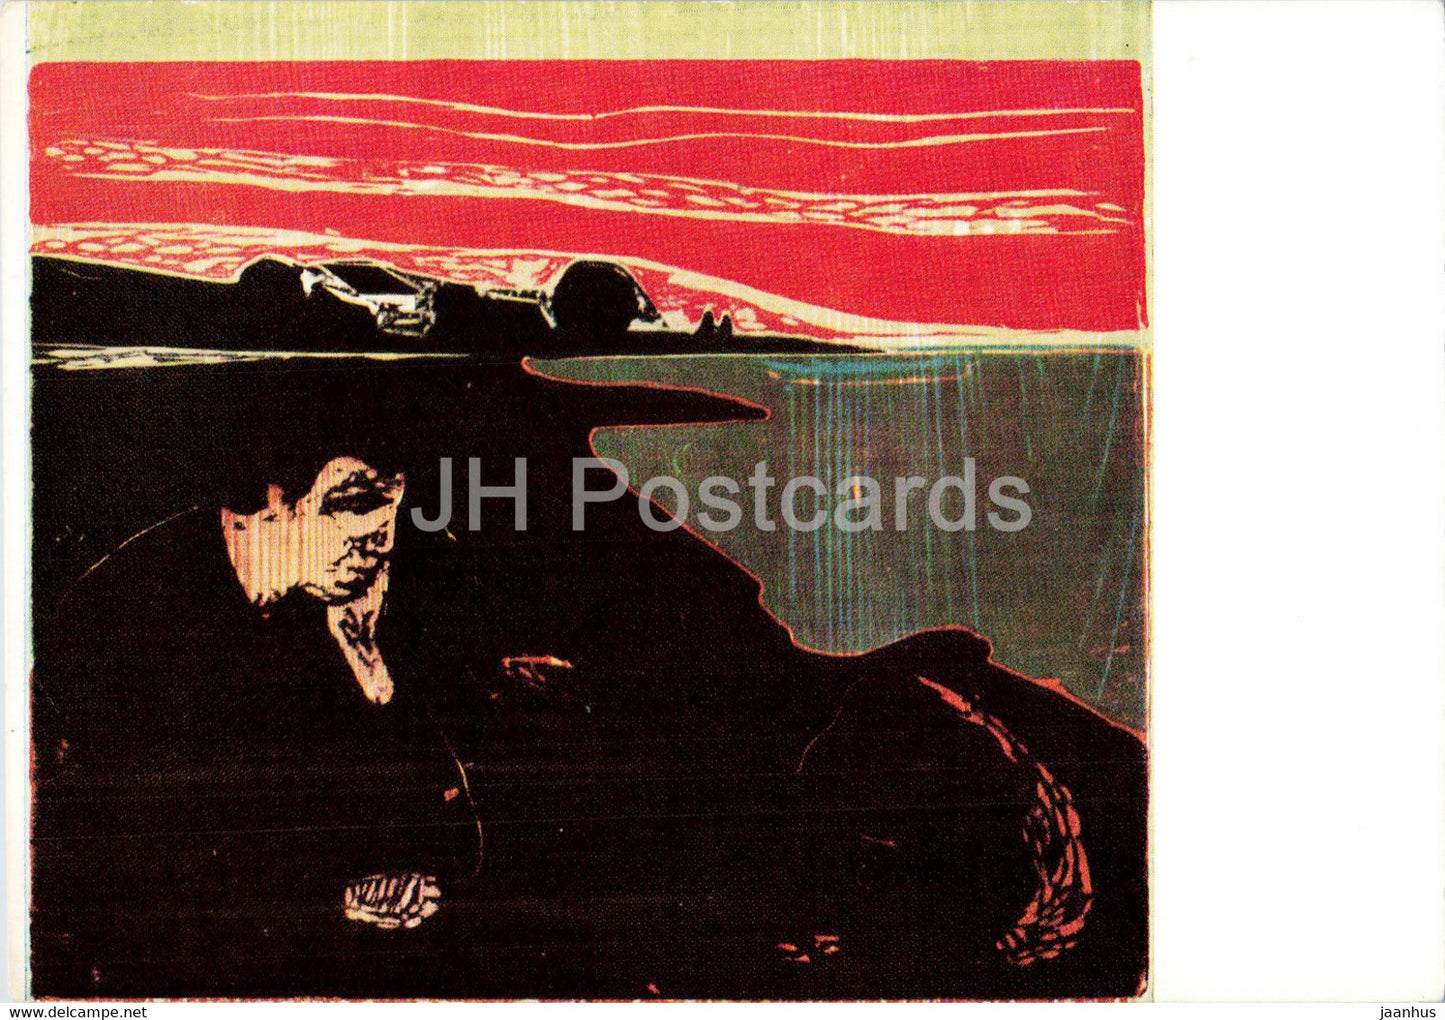 painting by Edvard Munch - Abend - Evening - Norwegian art - Germany - unused - JH Postcards